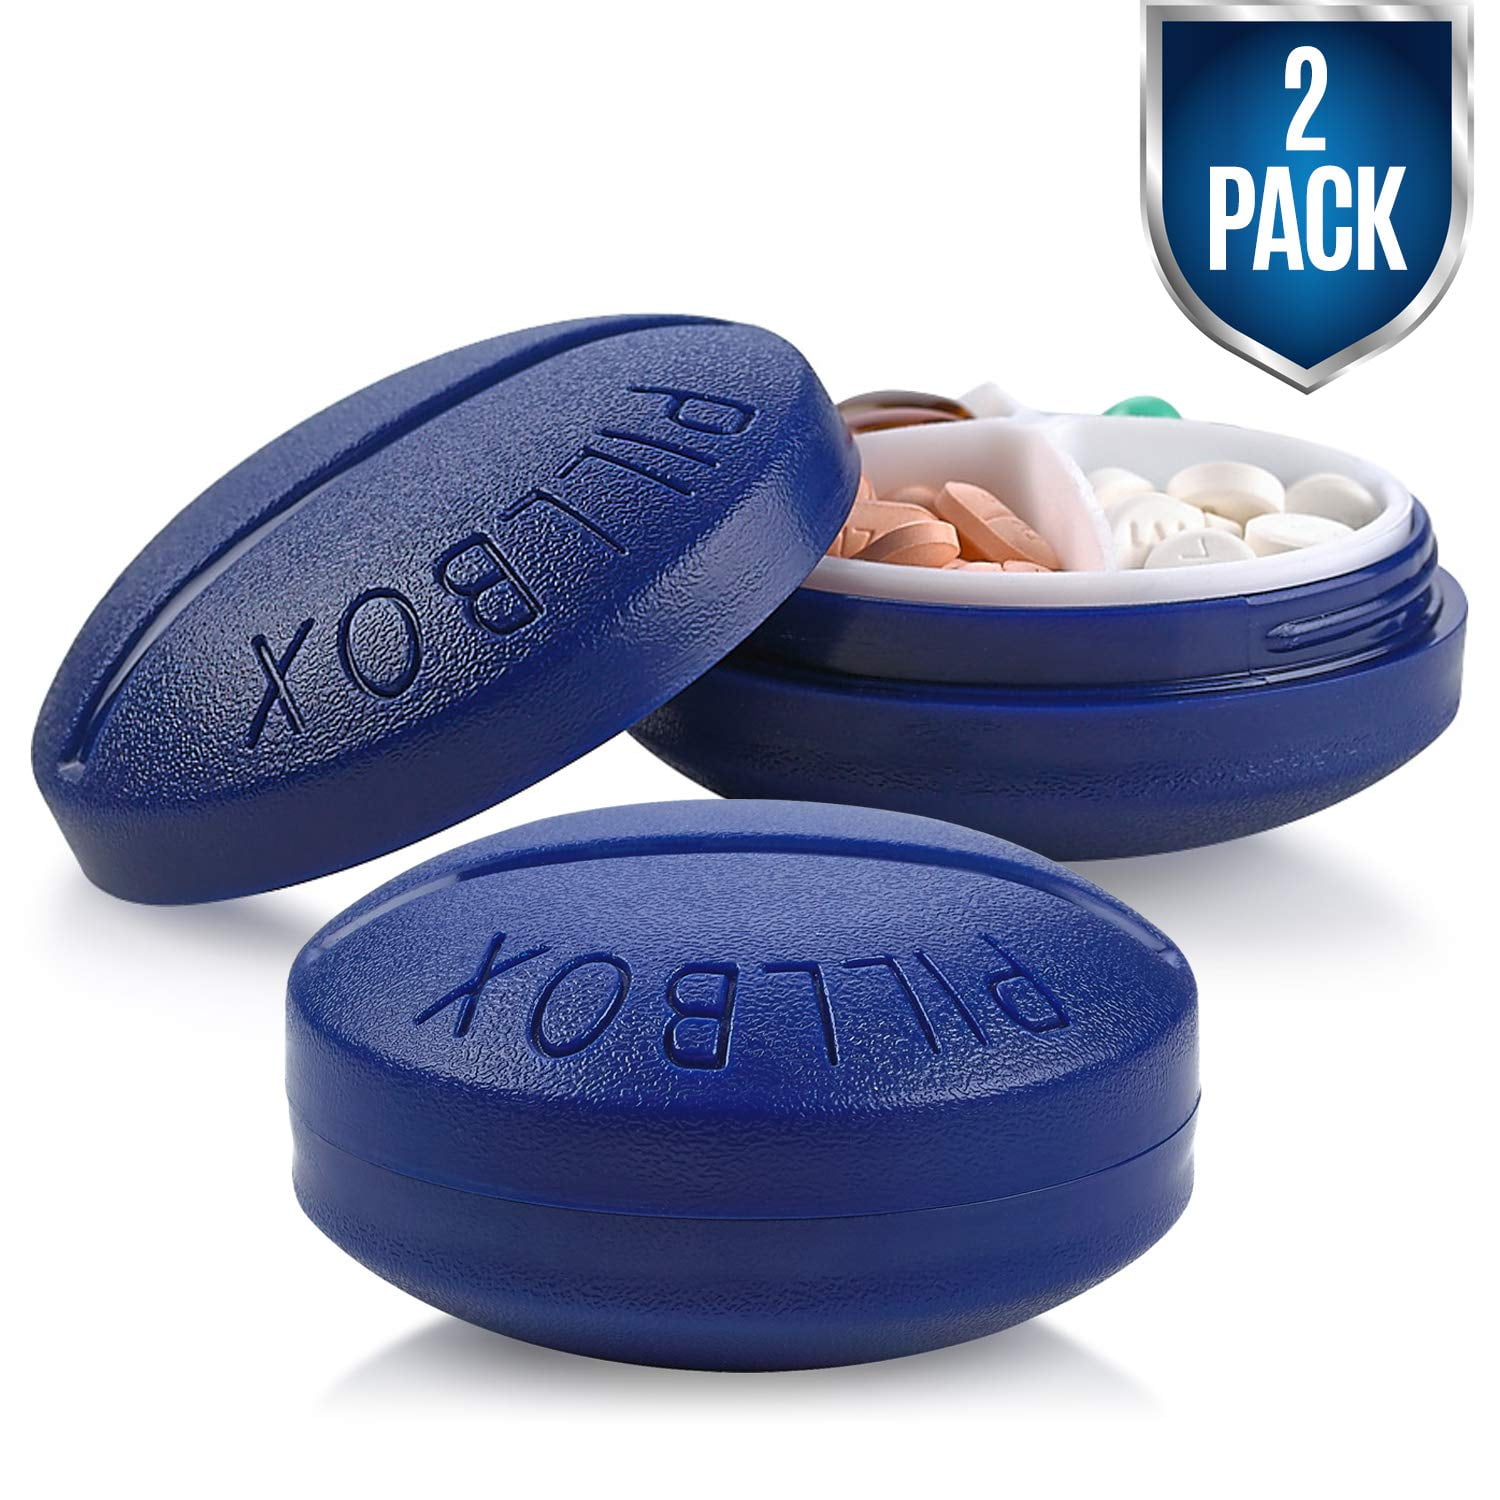 MEDca Small Pill Boxes, Pack of 2, Mini Compact Round Portable 4  Compartment Travel Pills Case Organizer, Vitamin and Medication Dispenser  Holder for up to 4 Times a Day, BPA Free Pill